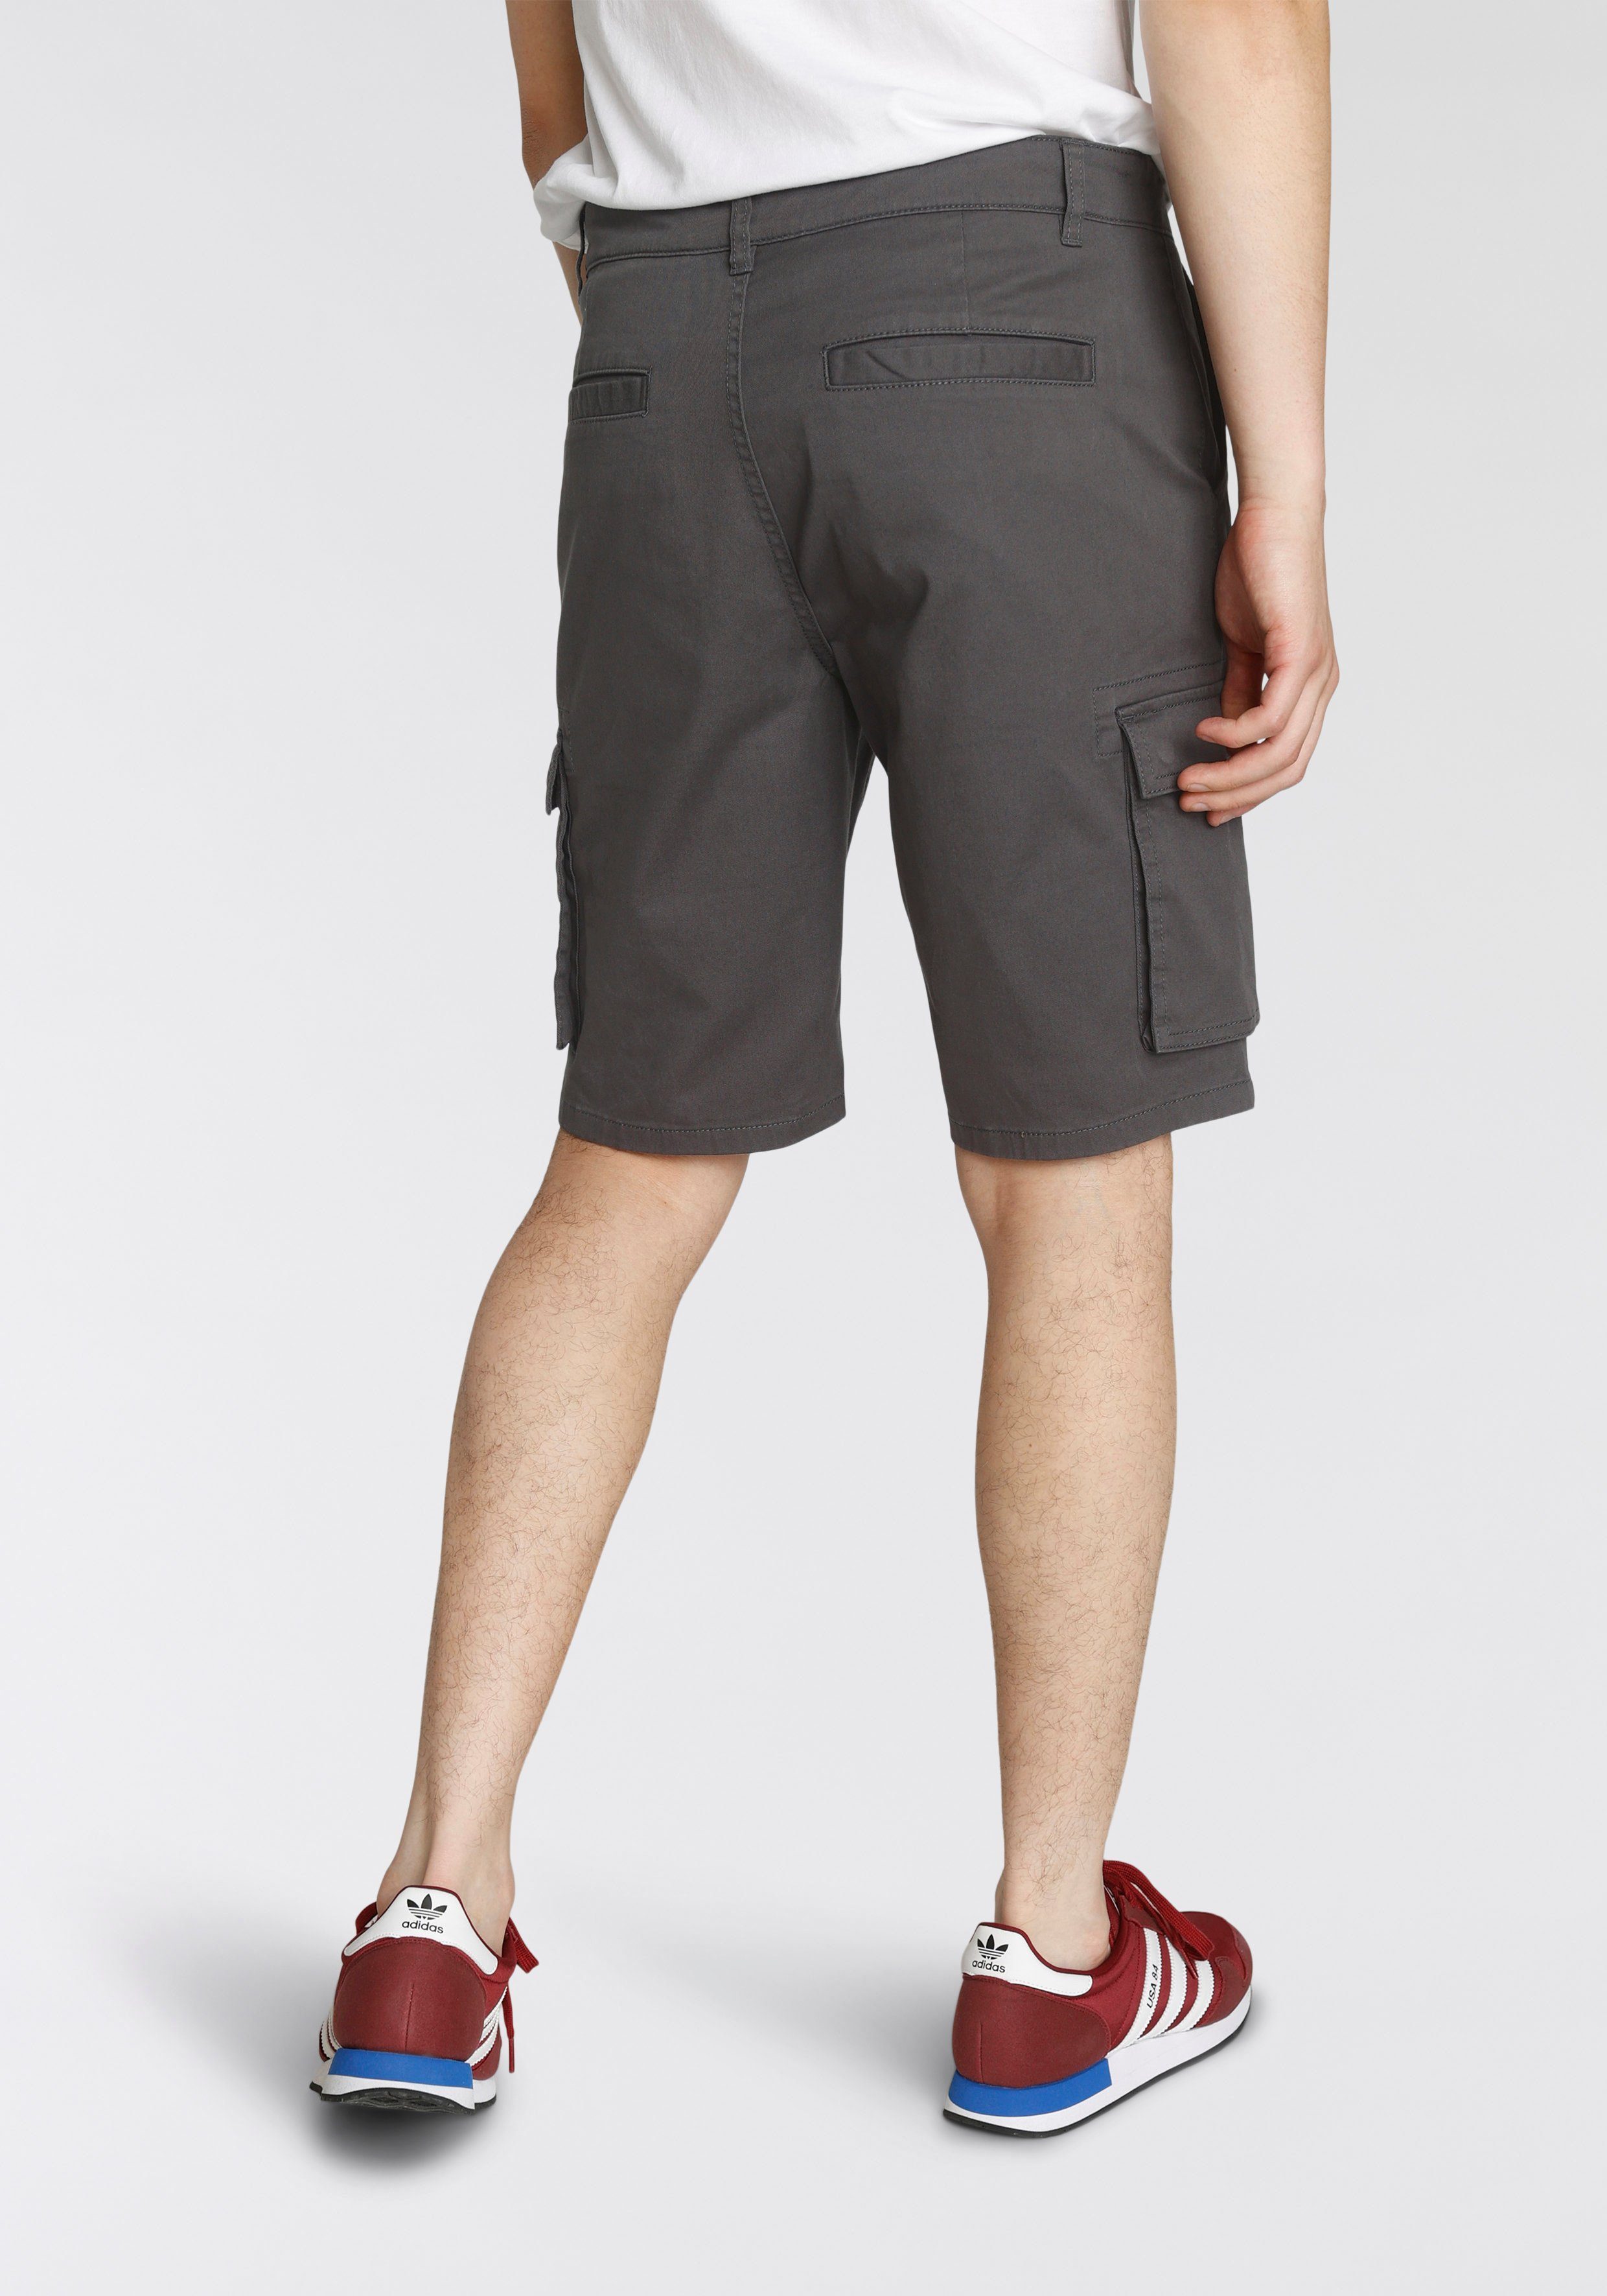 SHORTS Cargoshorts ONLY CAM STAGE SONS & CARGO grau